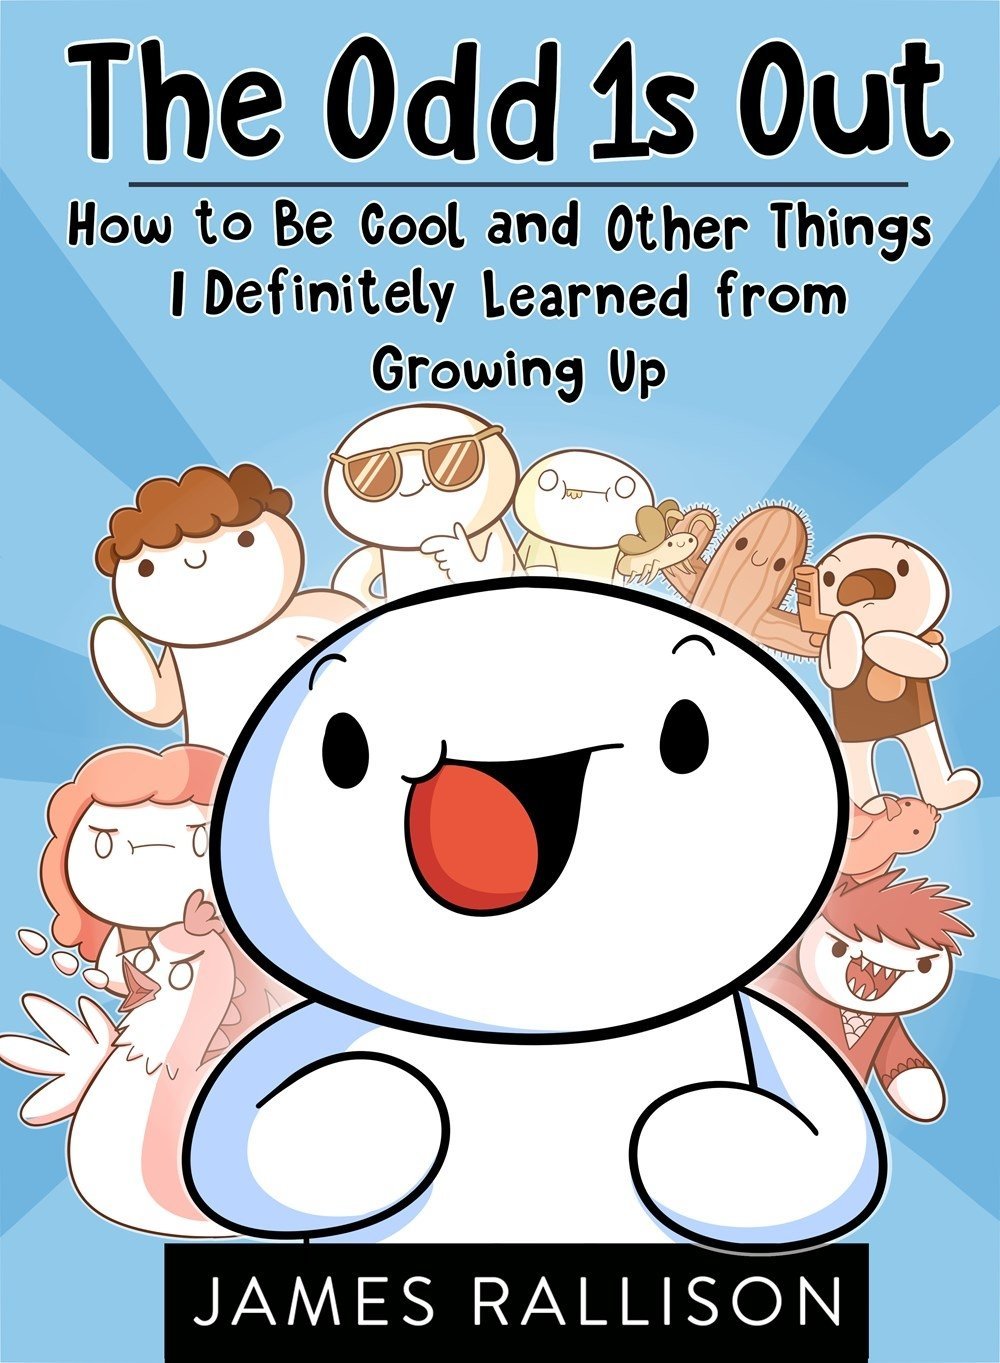 The Odd 1s Out: How to Be Cool and Other Things I Definitely Learned from Growing Up